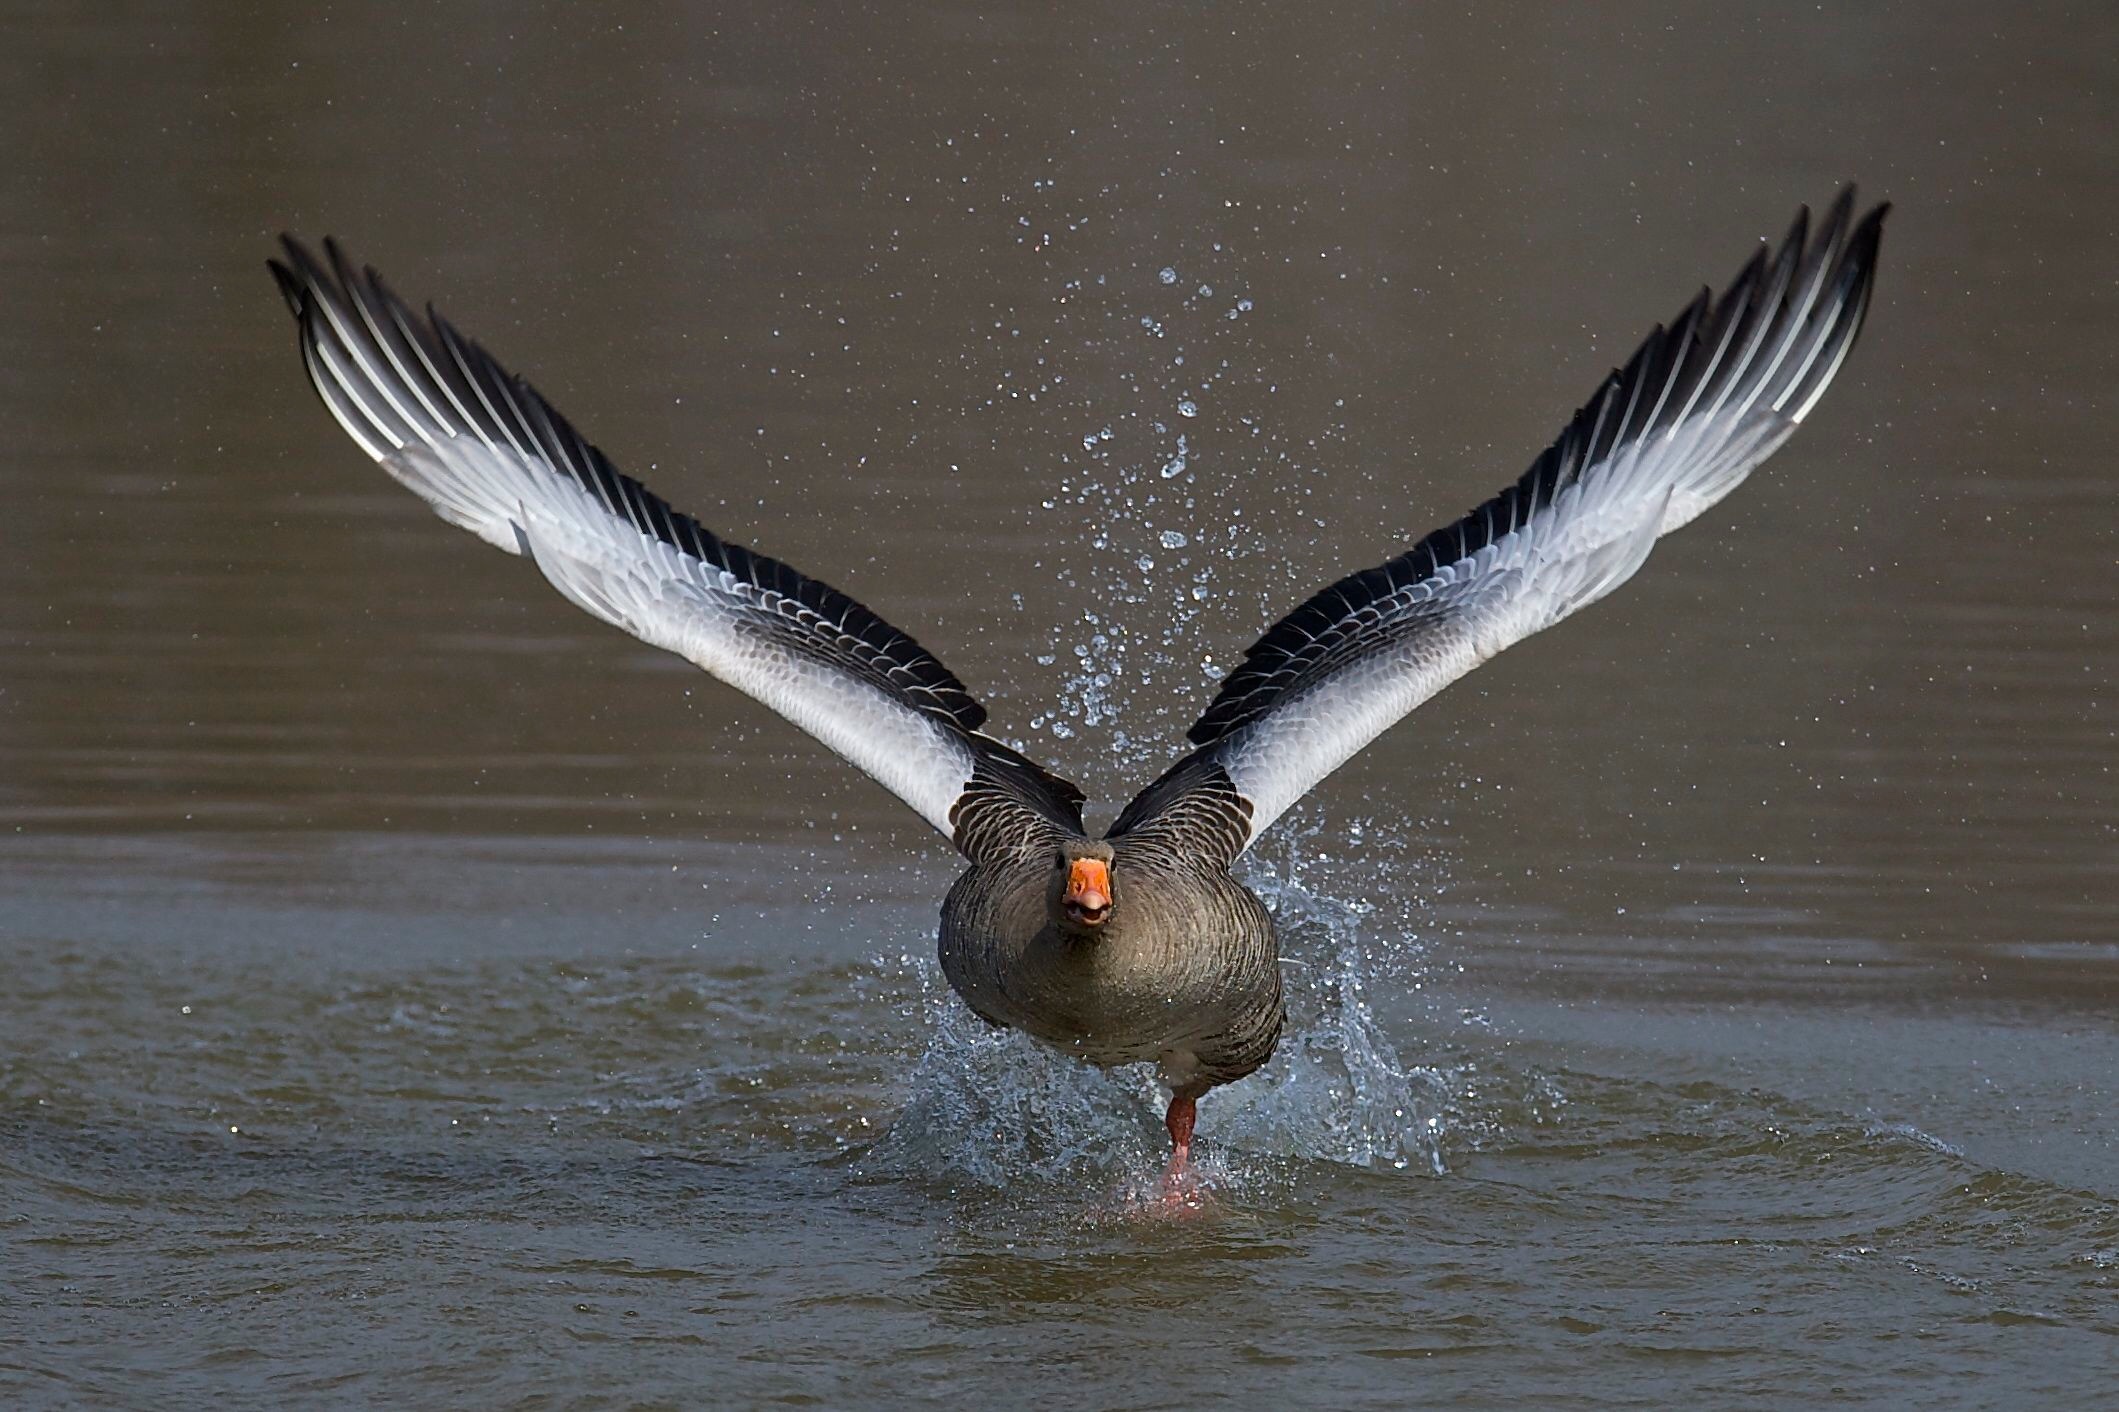 Fly fly fly the goose maia!...